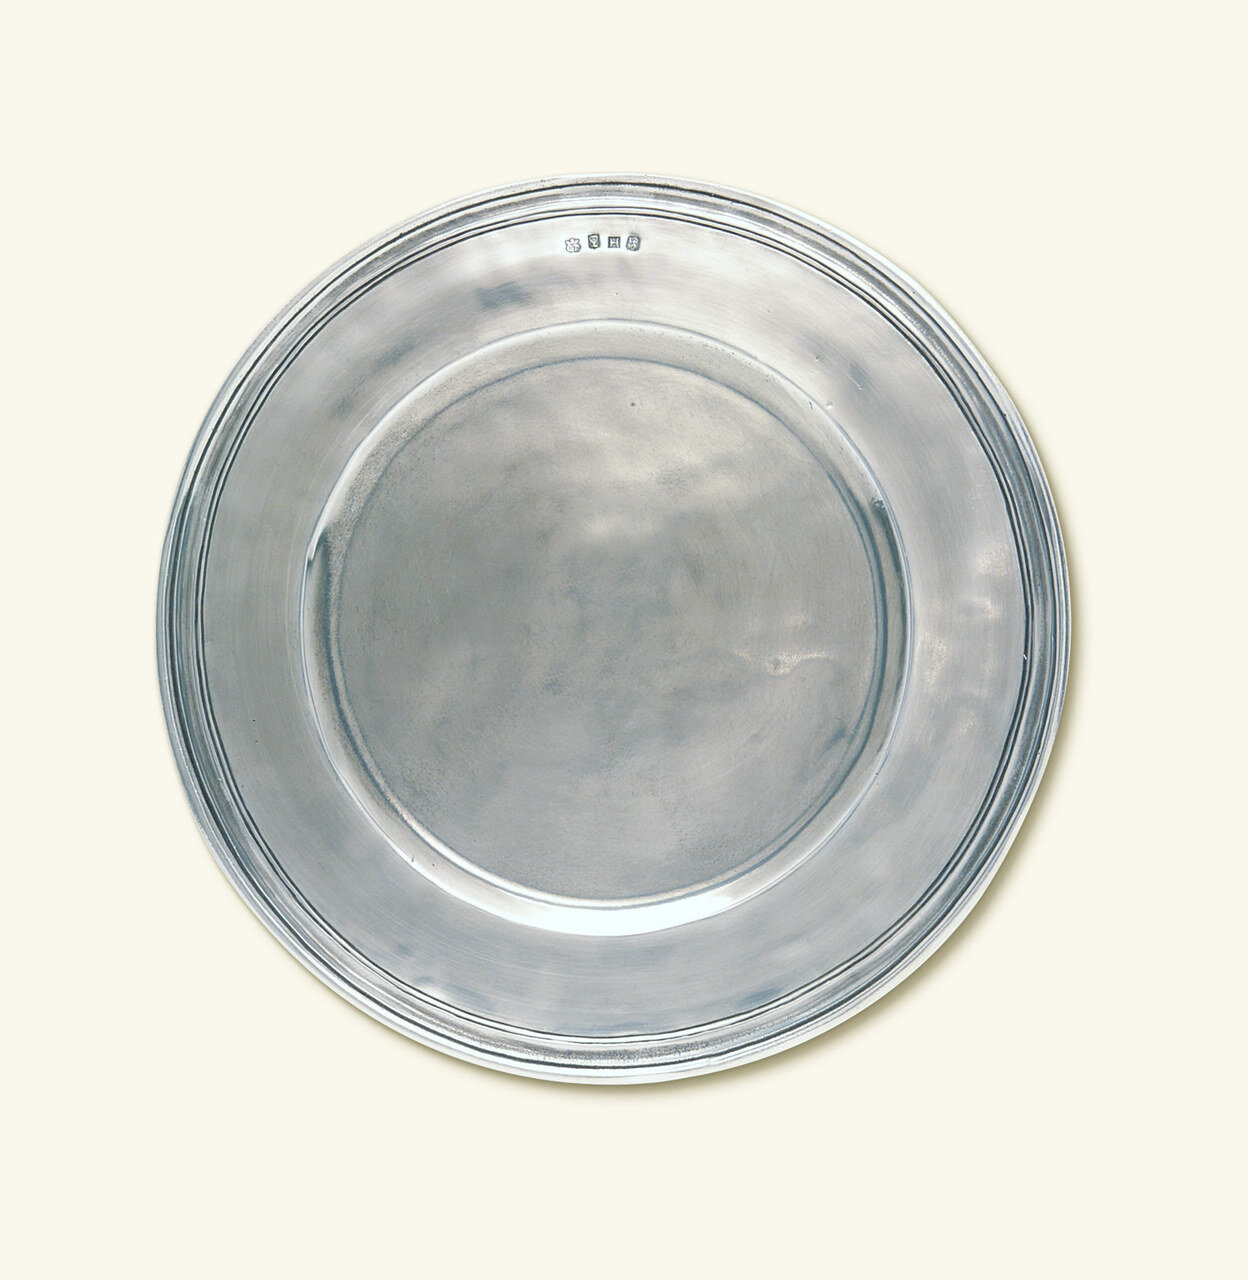 Match Pewter Scribed Rim Charger Large 916.2